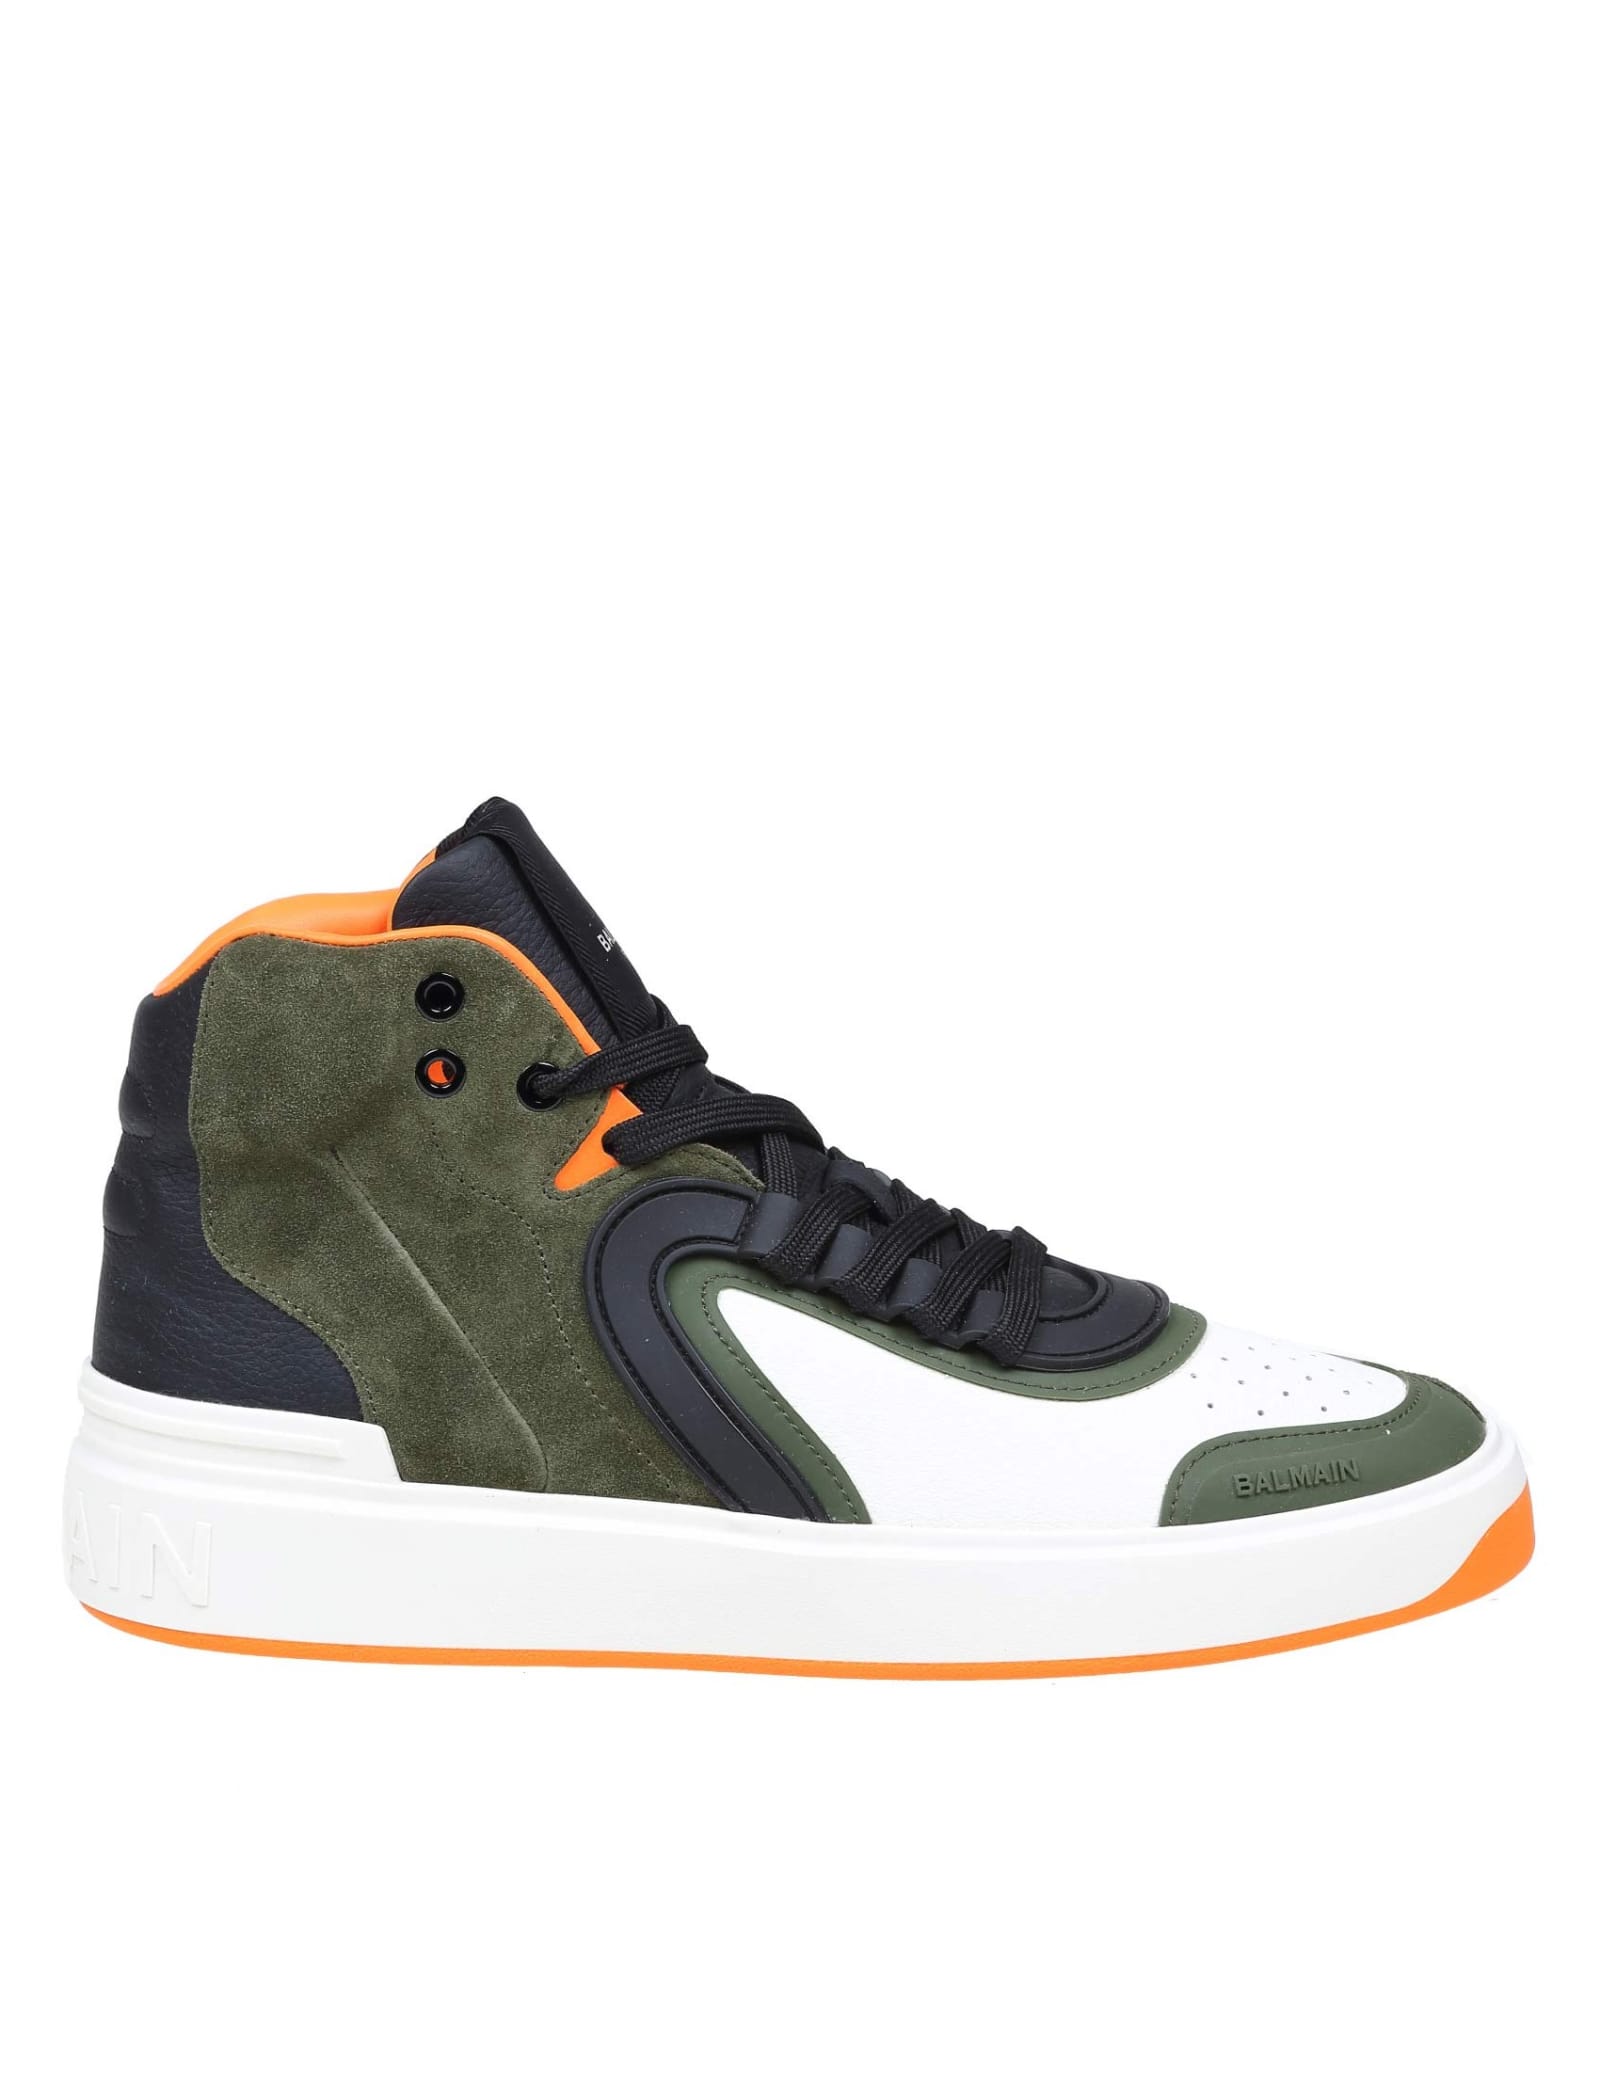 Balmain B Skate High Top In Leather And Suede